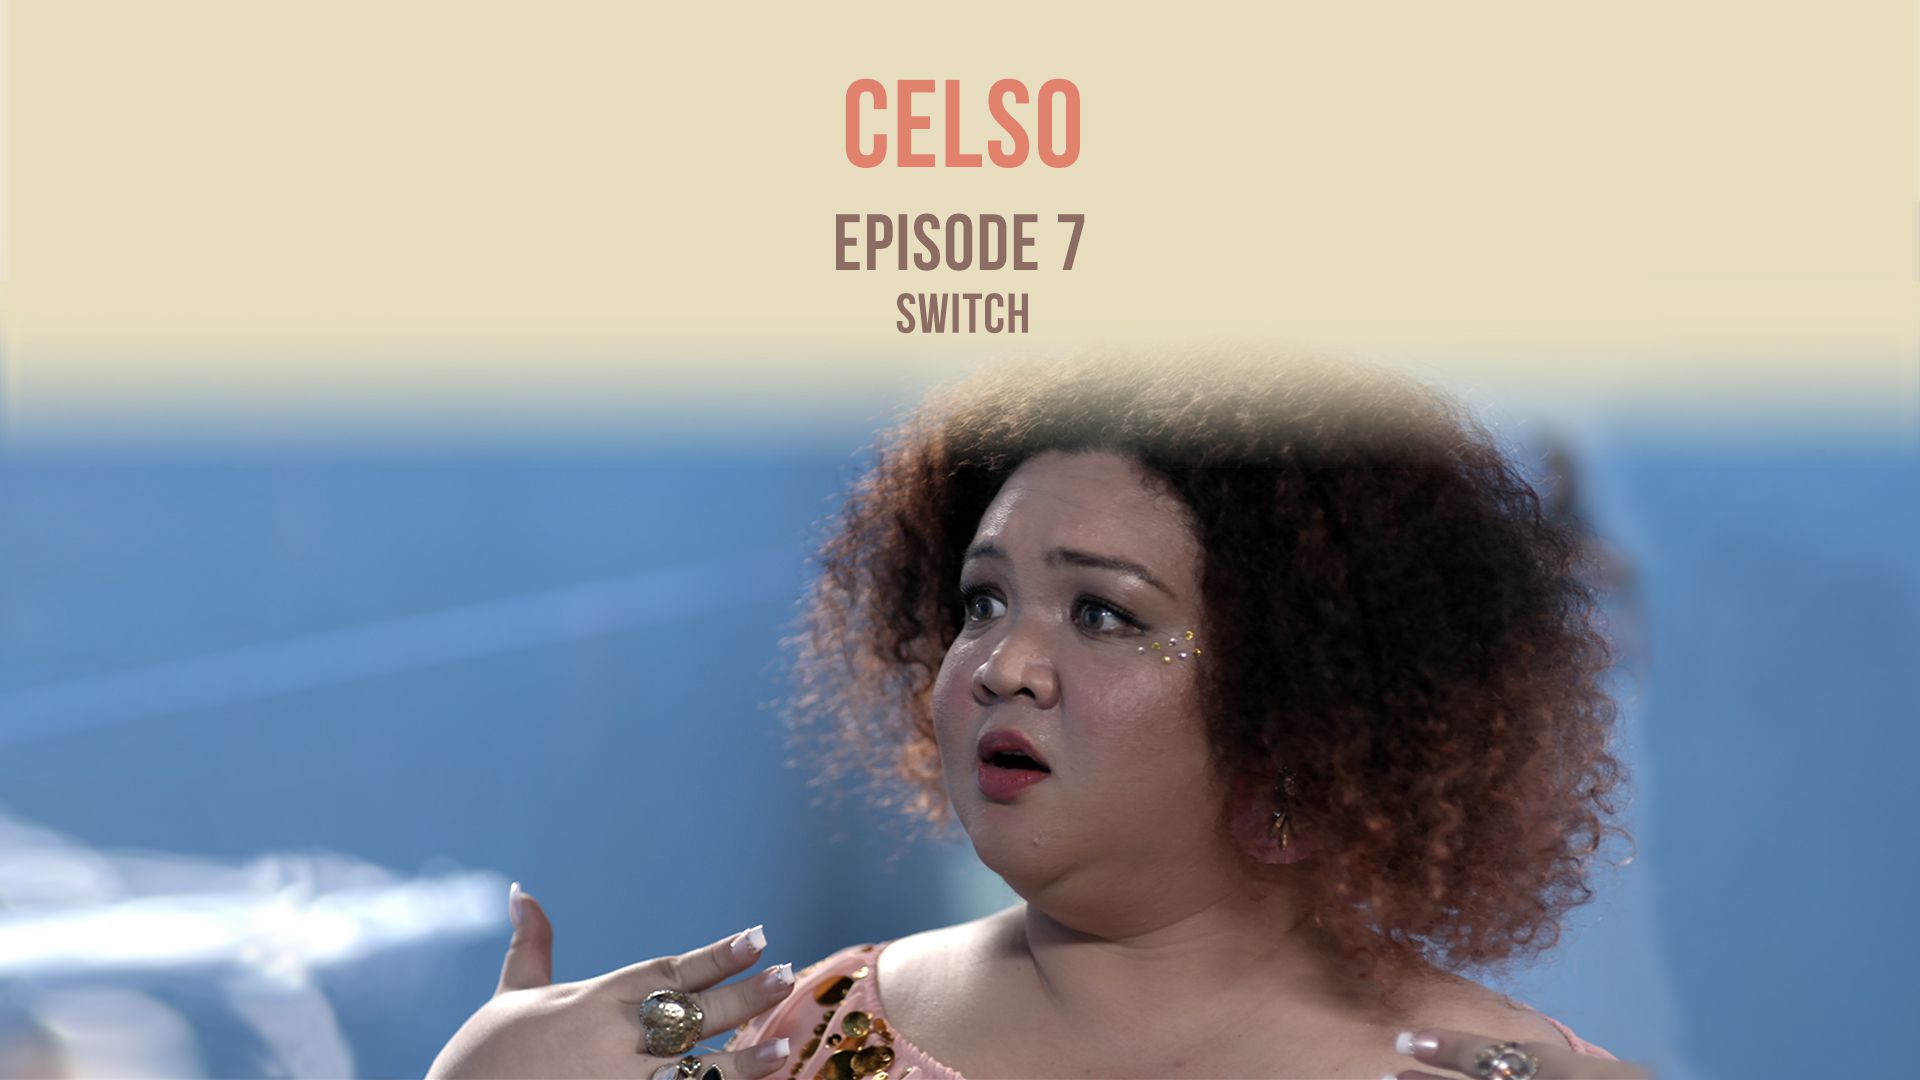 CELSO Episode 7